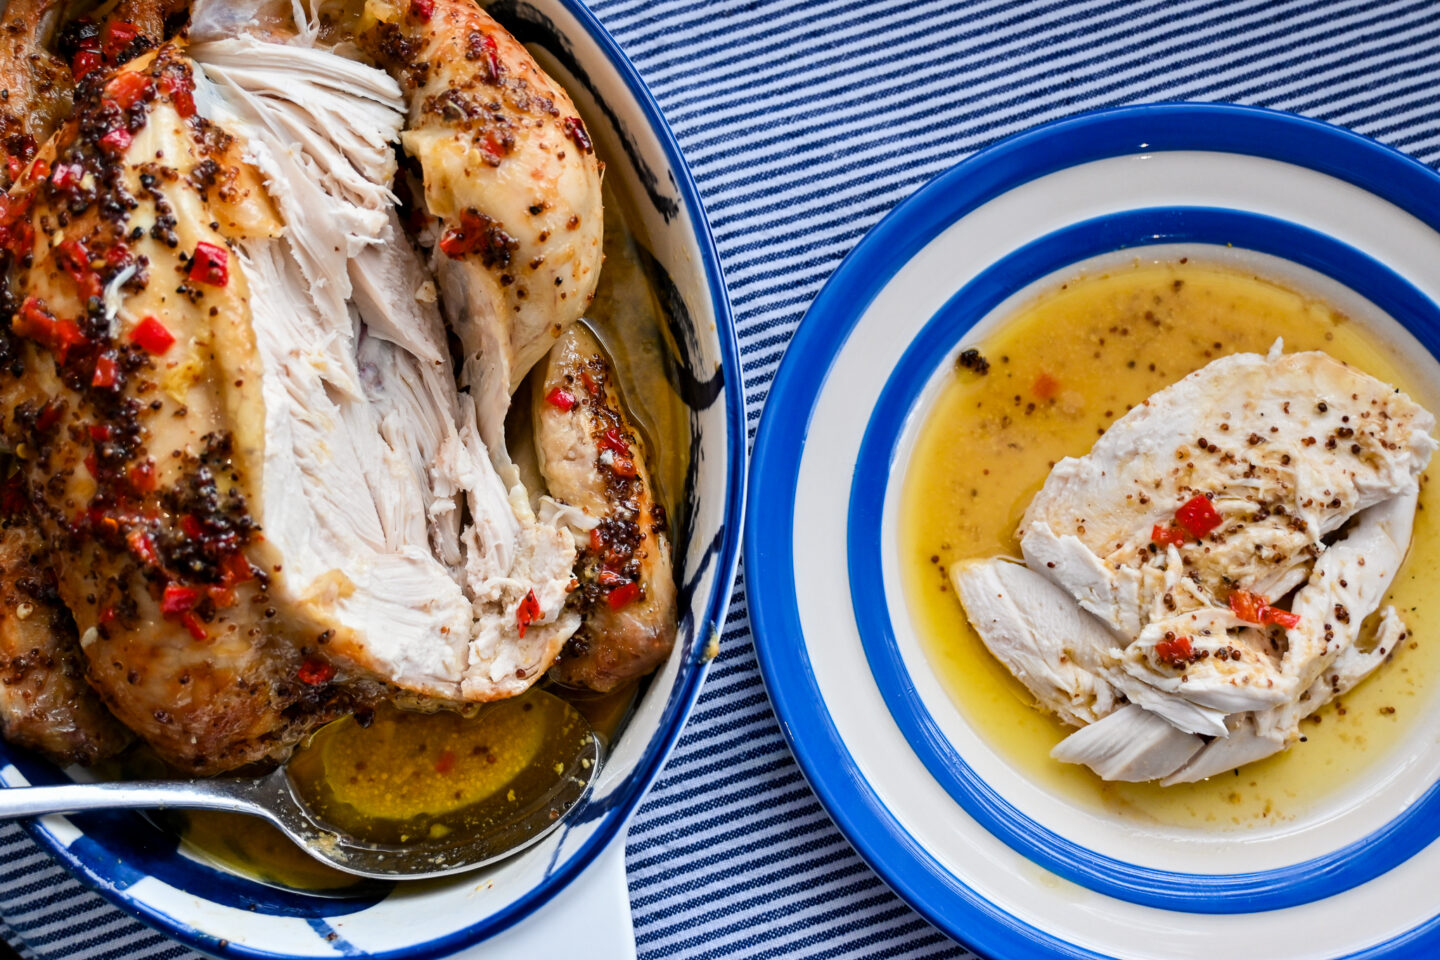 Partially carved Roast Chicken with a serving on a blue & white cornishware plate on a blue & white striped background